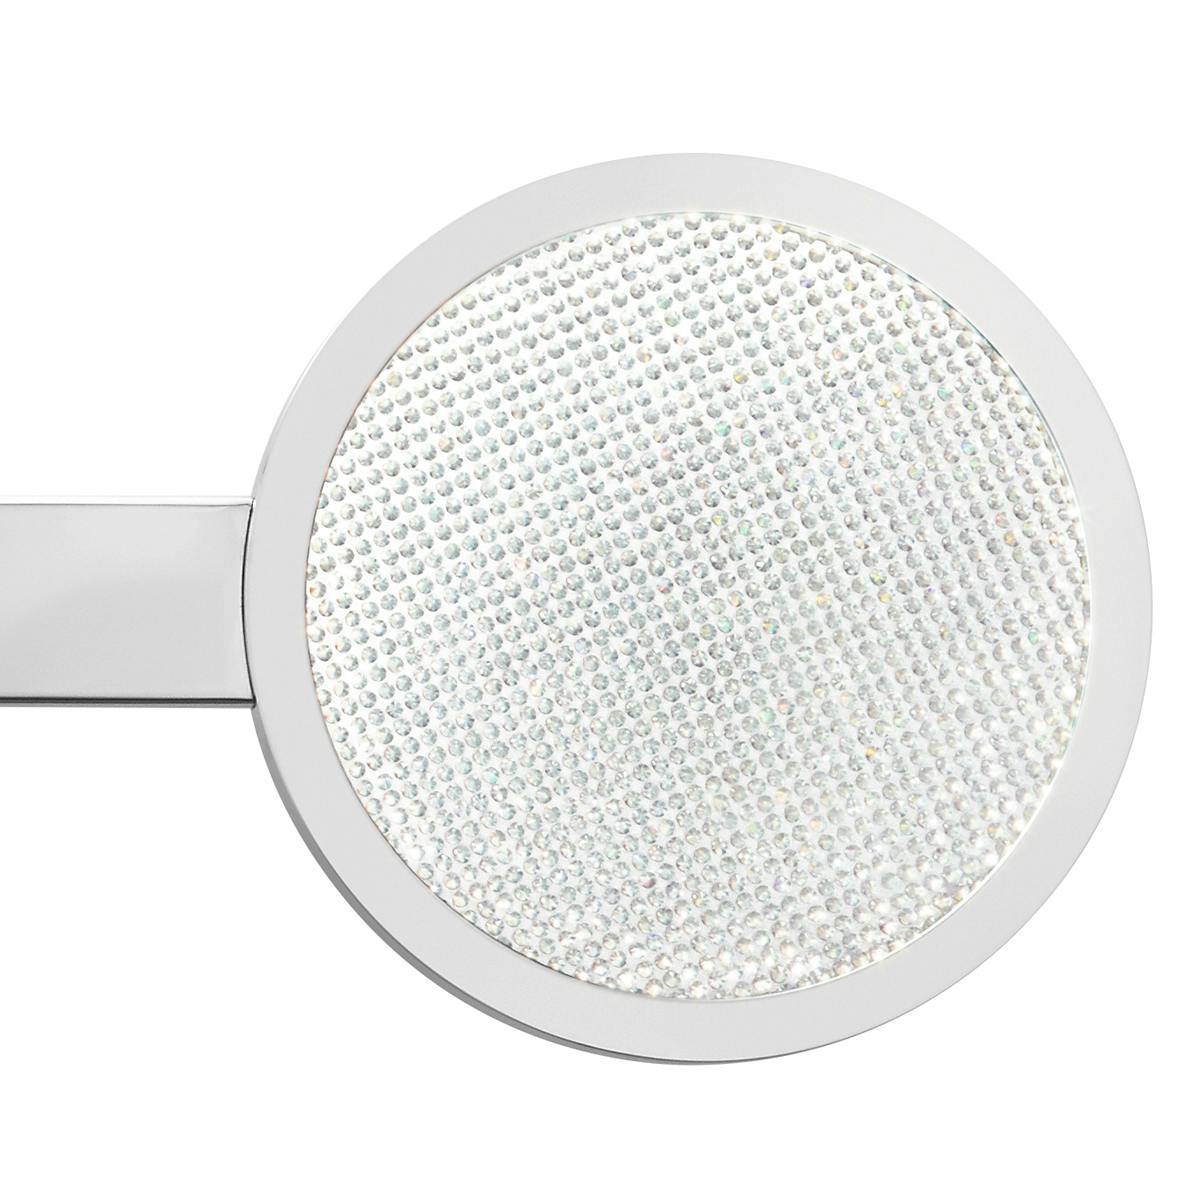 Close up view of the Delaine 3000K 3 Light Vanity Light Chrome on a white background